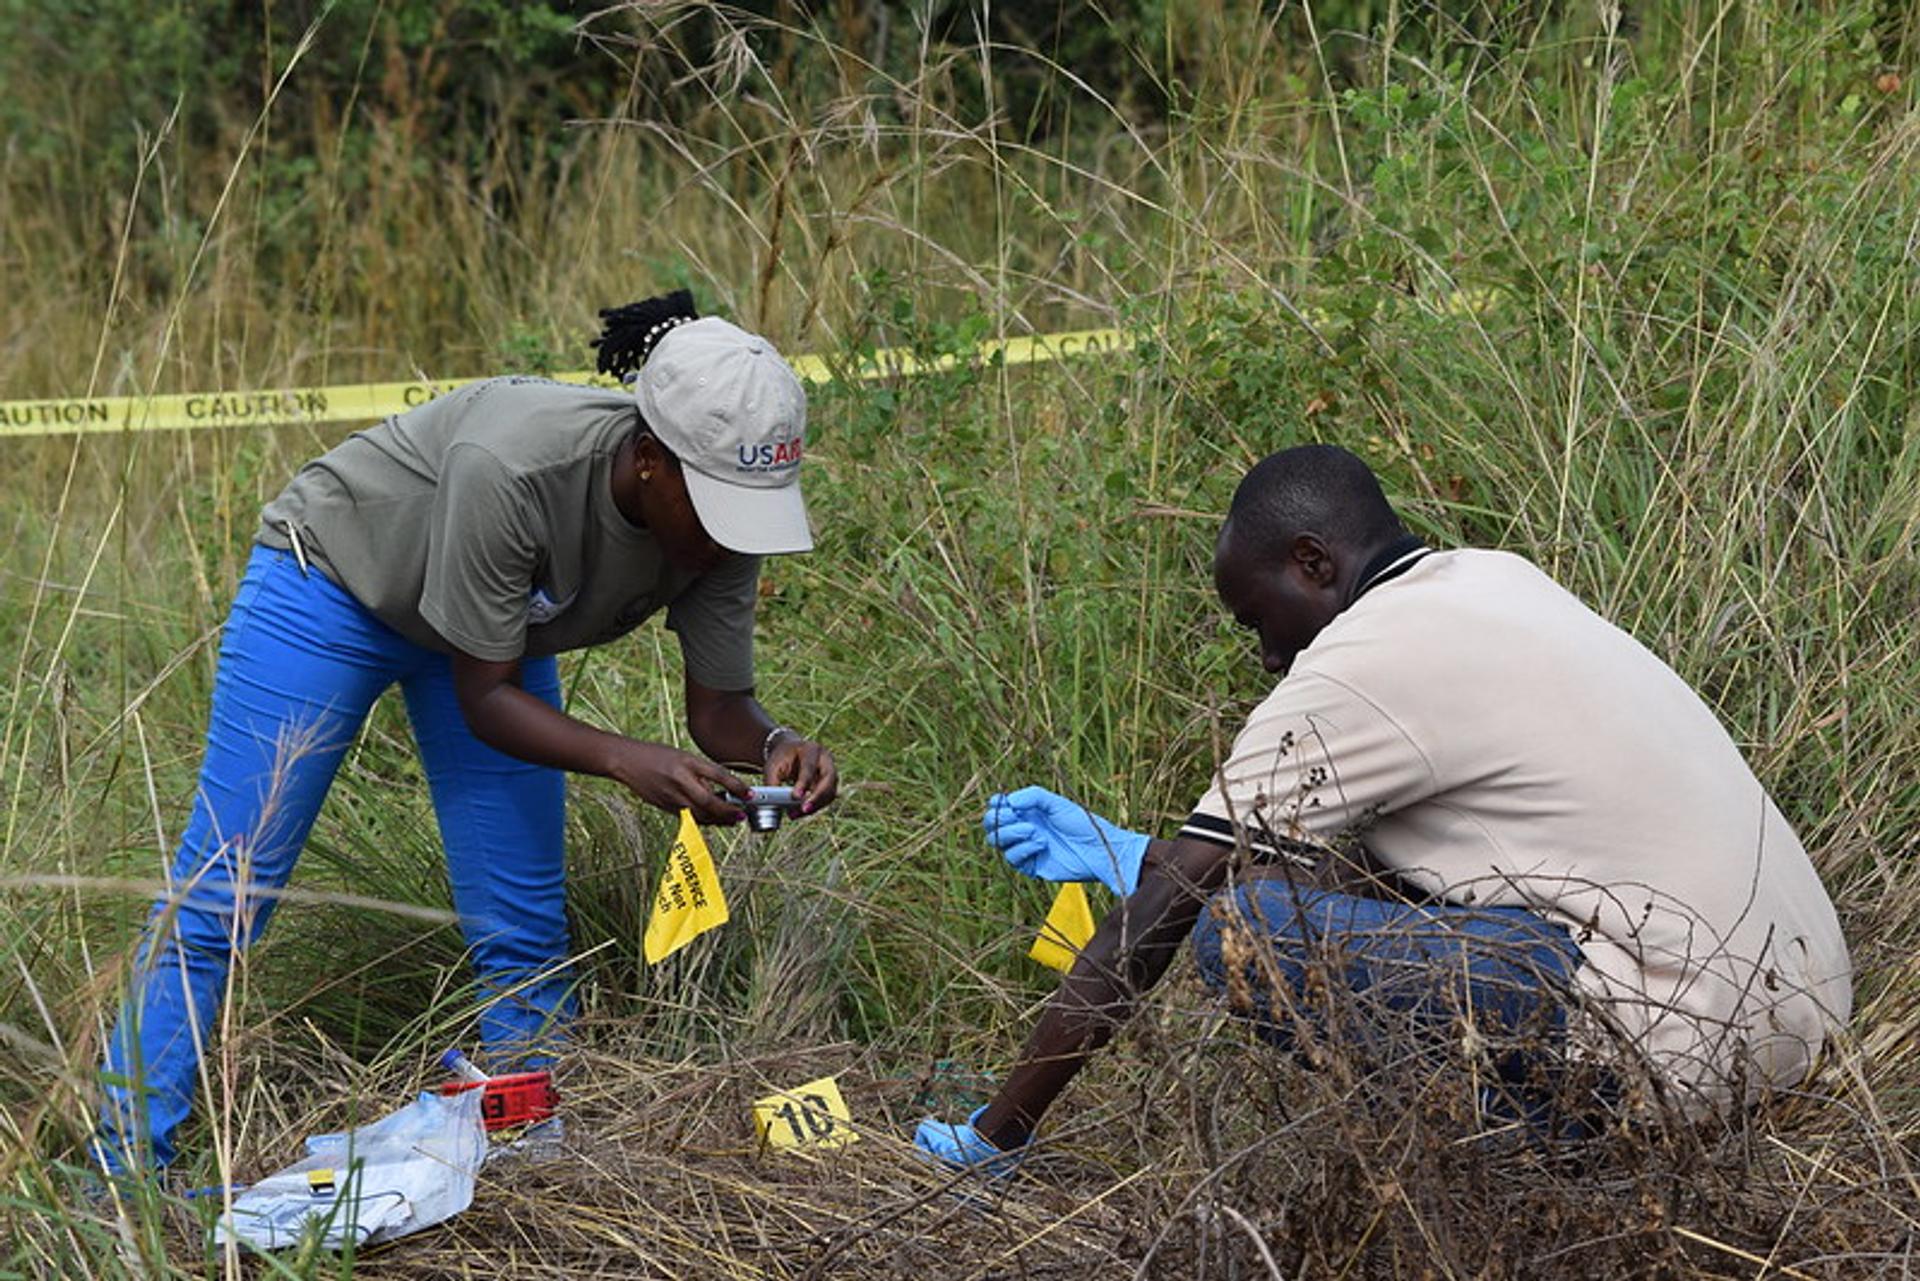 Photo of two wildlife crime investigators in Uganda taking photos of the ground, among long grasses.